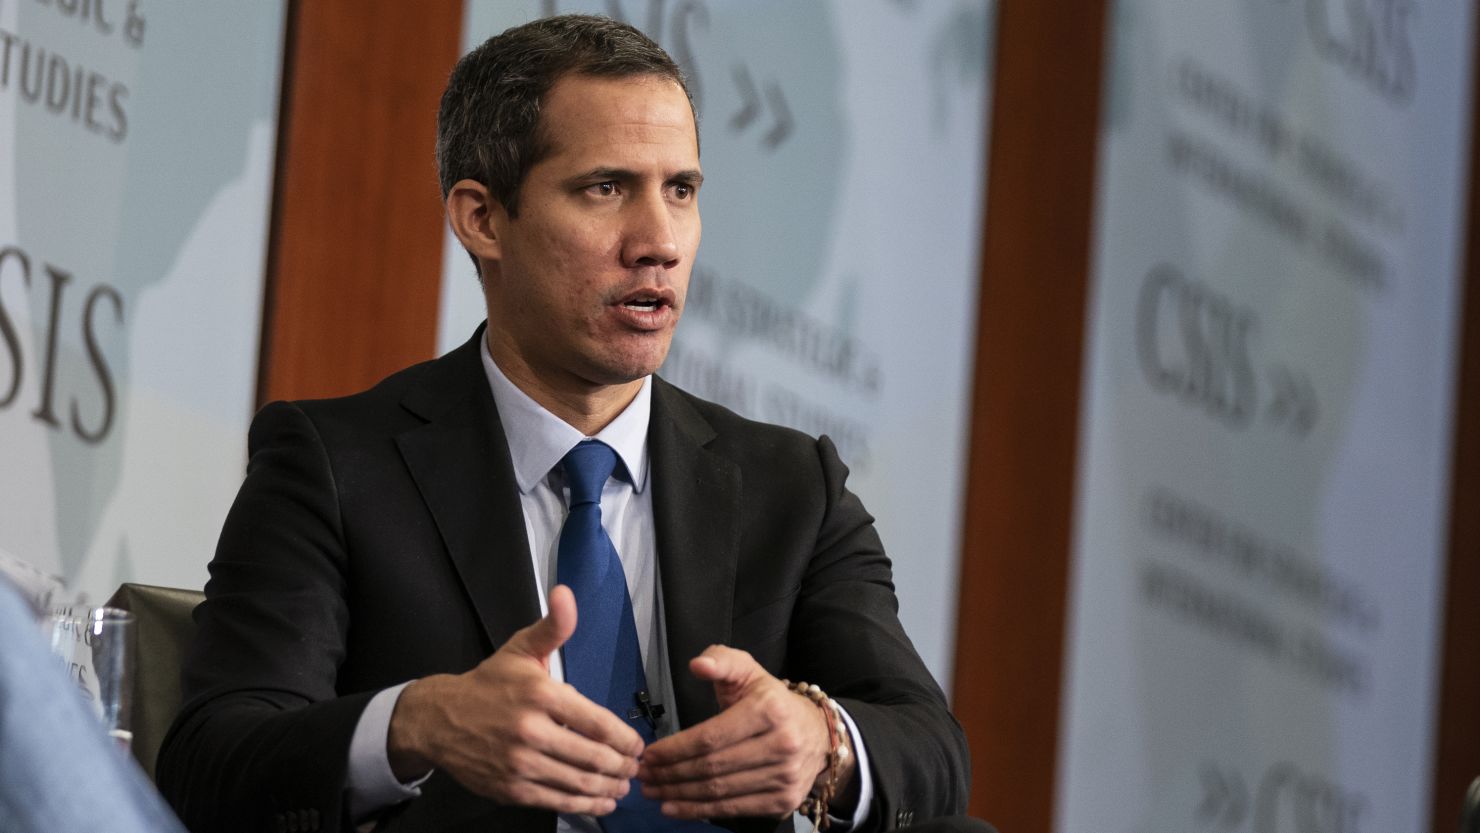 Former Venezuelan opposition leader Juan Guaido speaks during an event at the Center for Strategic and International Studies in Washington, DC, on May 5.